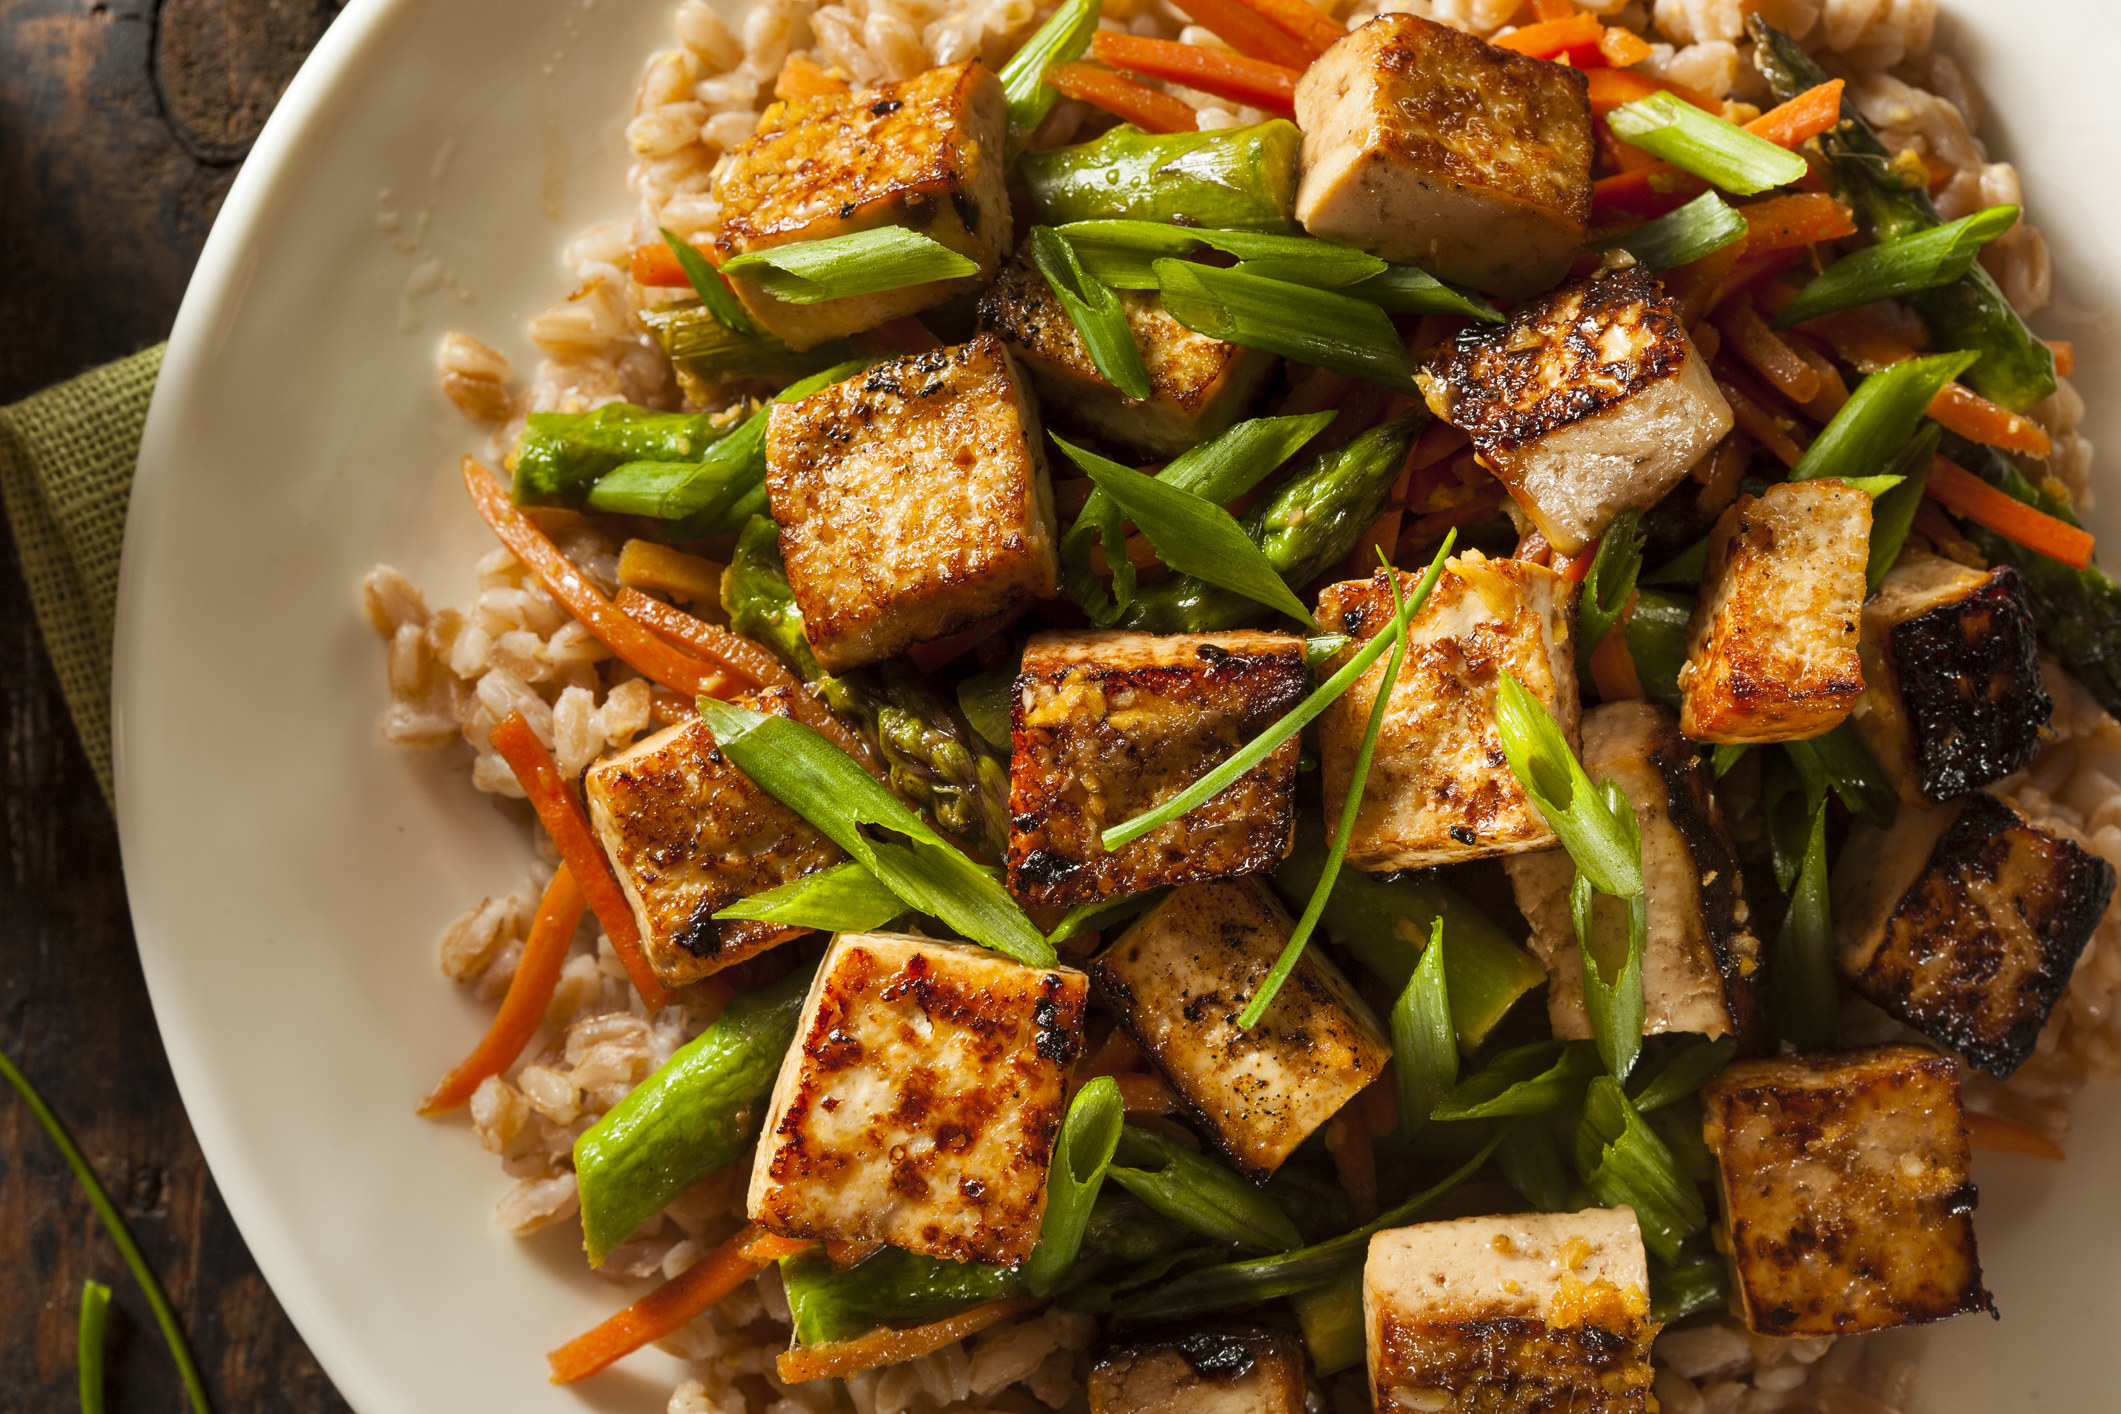 Tofu stir fry with vegetables and rice